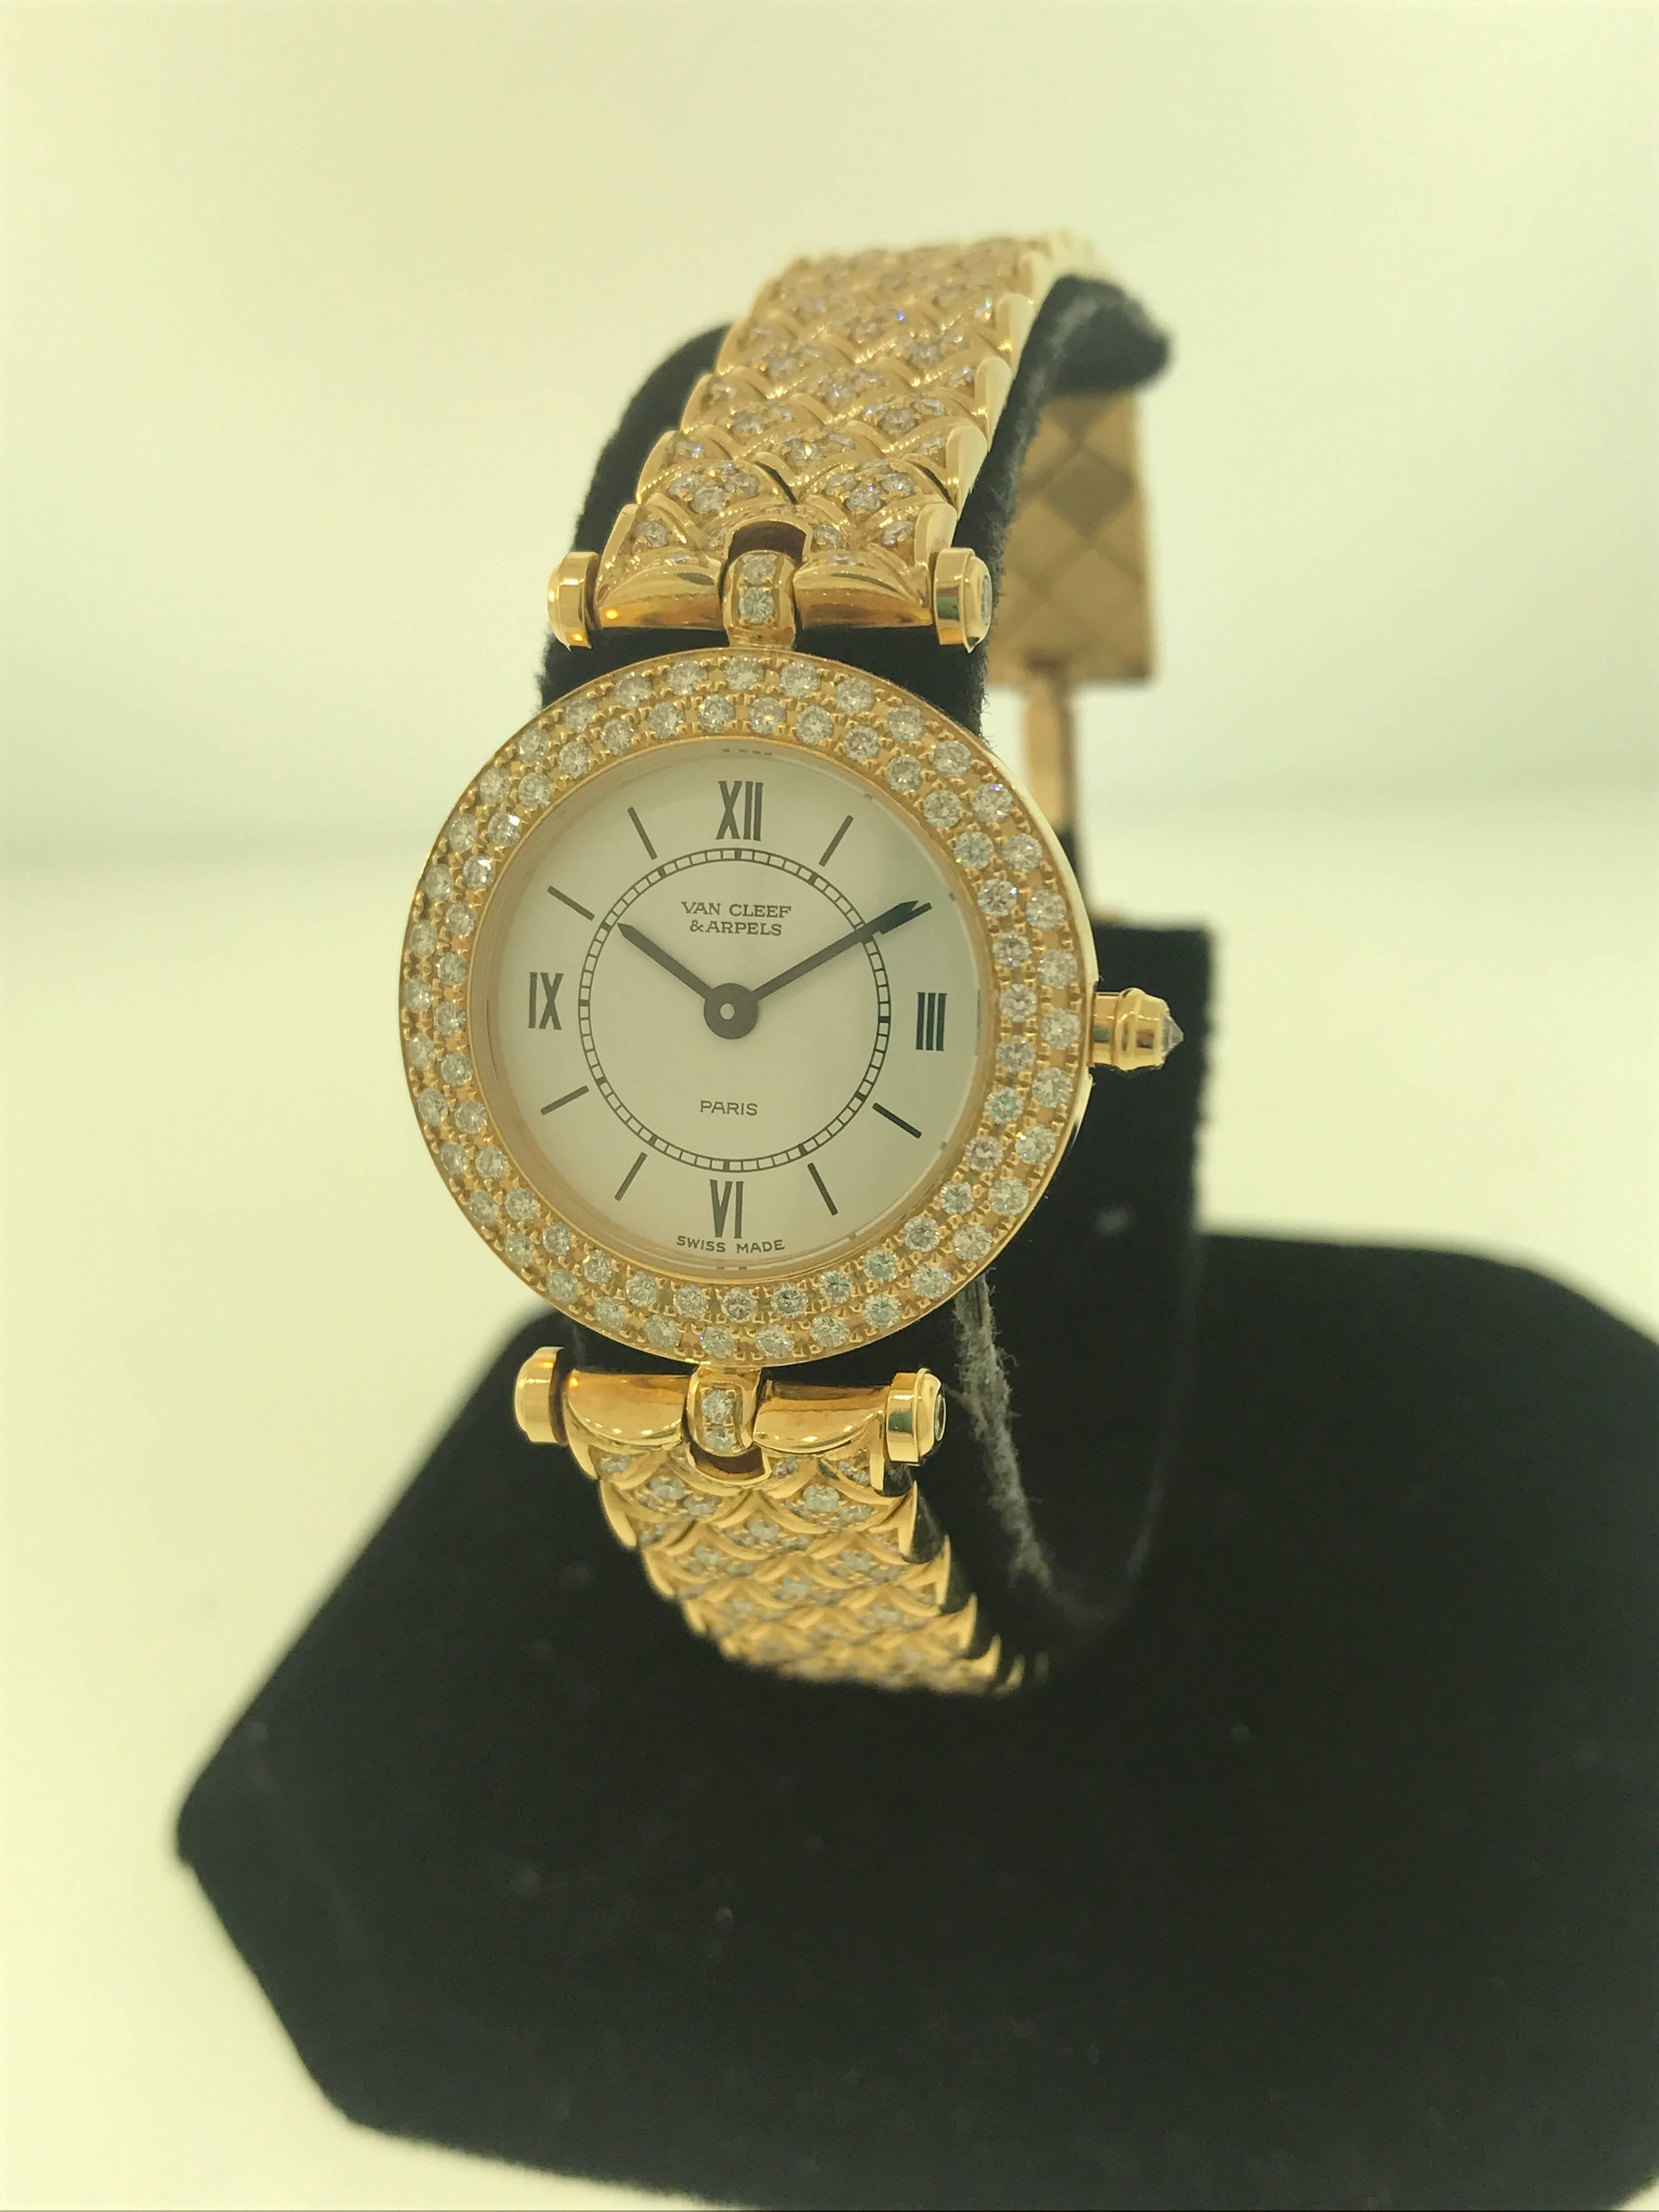 Van Cleef & Arpels Classique Ladies Watch

Model Number: 322632

100% Authentic

Pre owned restored to be in perfectly working & pristine condition

Comes with a generic watch box

18 Karat Yellow Gold Case & Bracelet

Bezel set with 2 rows of